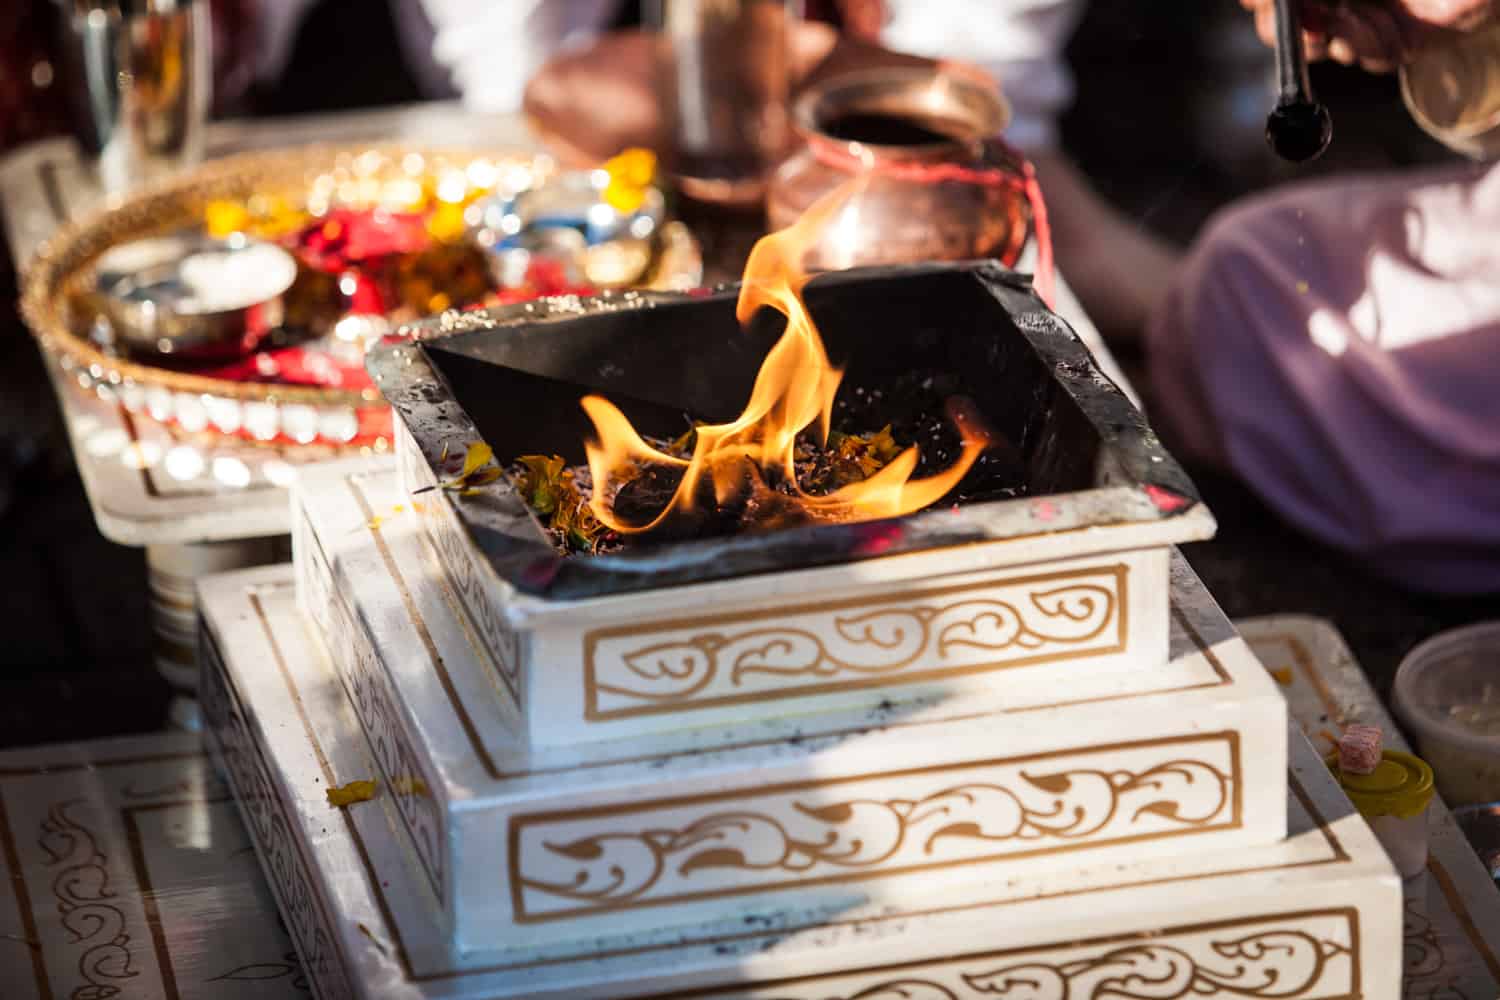 Close up on fire during traditional Hindu wedding ceremony